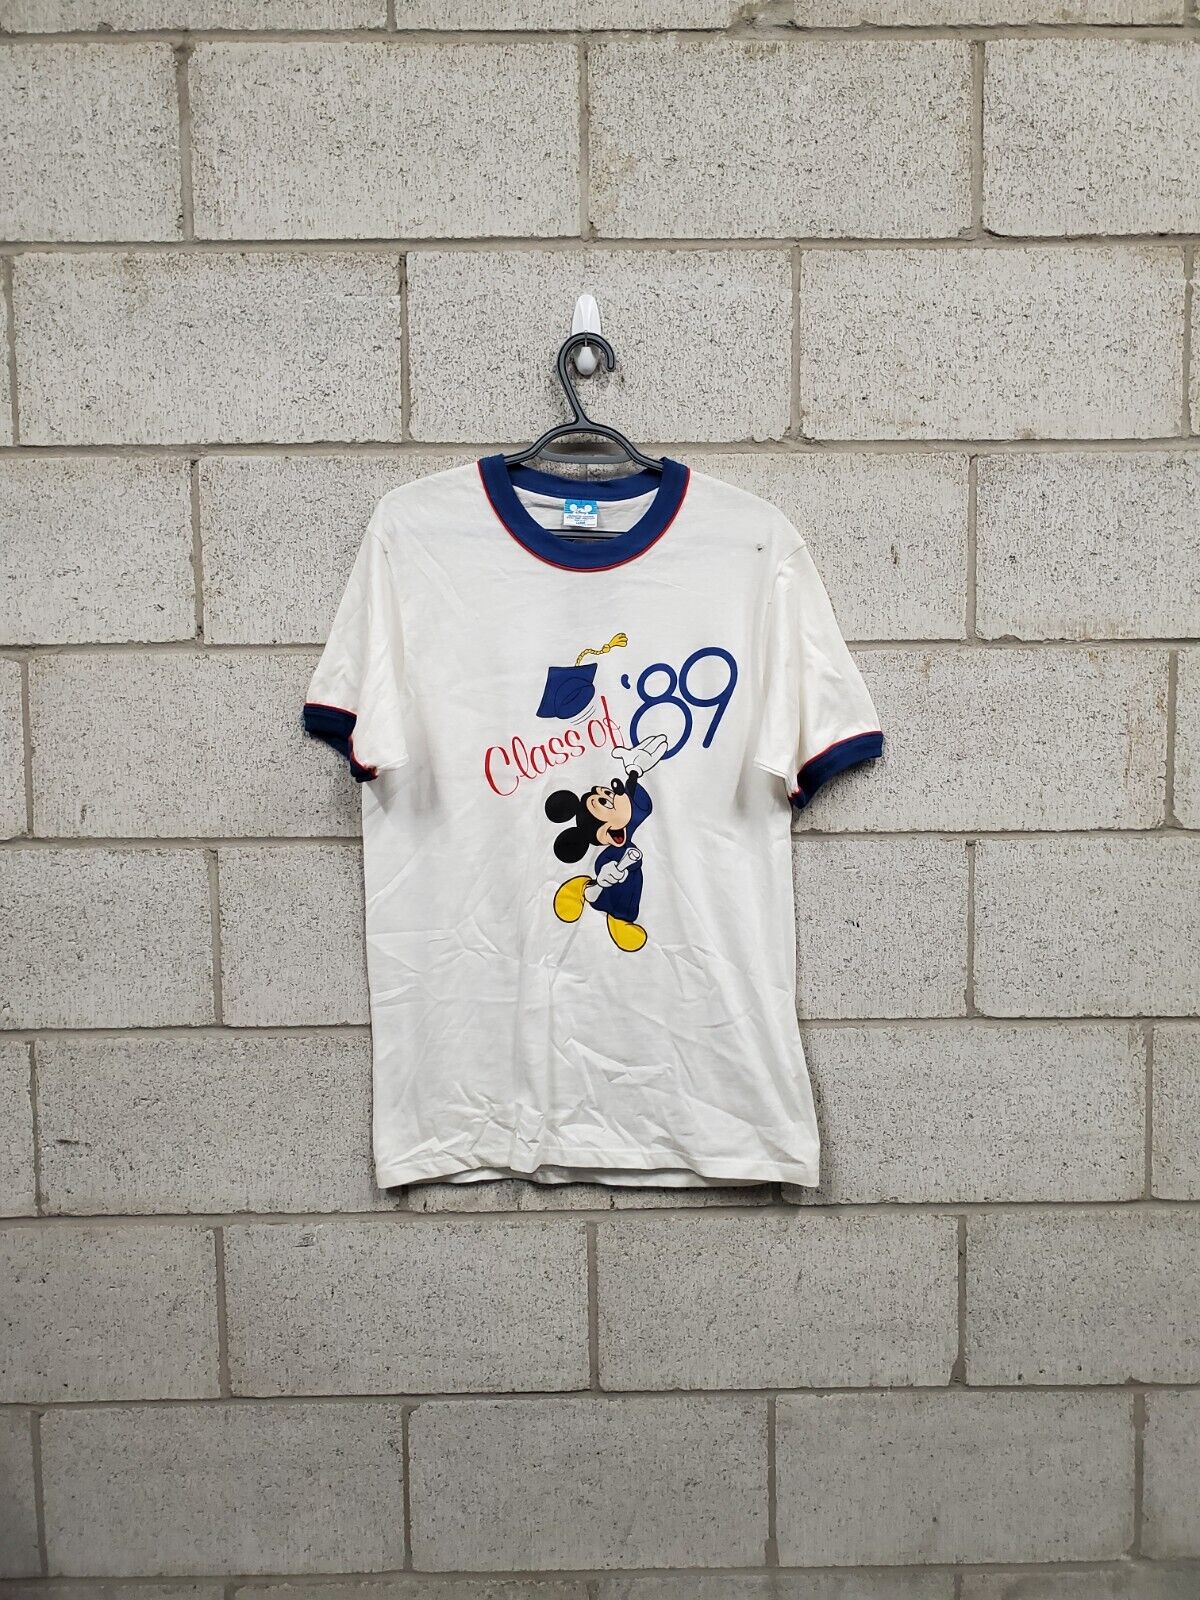 Mens 1989 Mickey Mouse T-Shirt Size Large